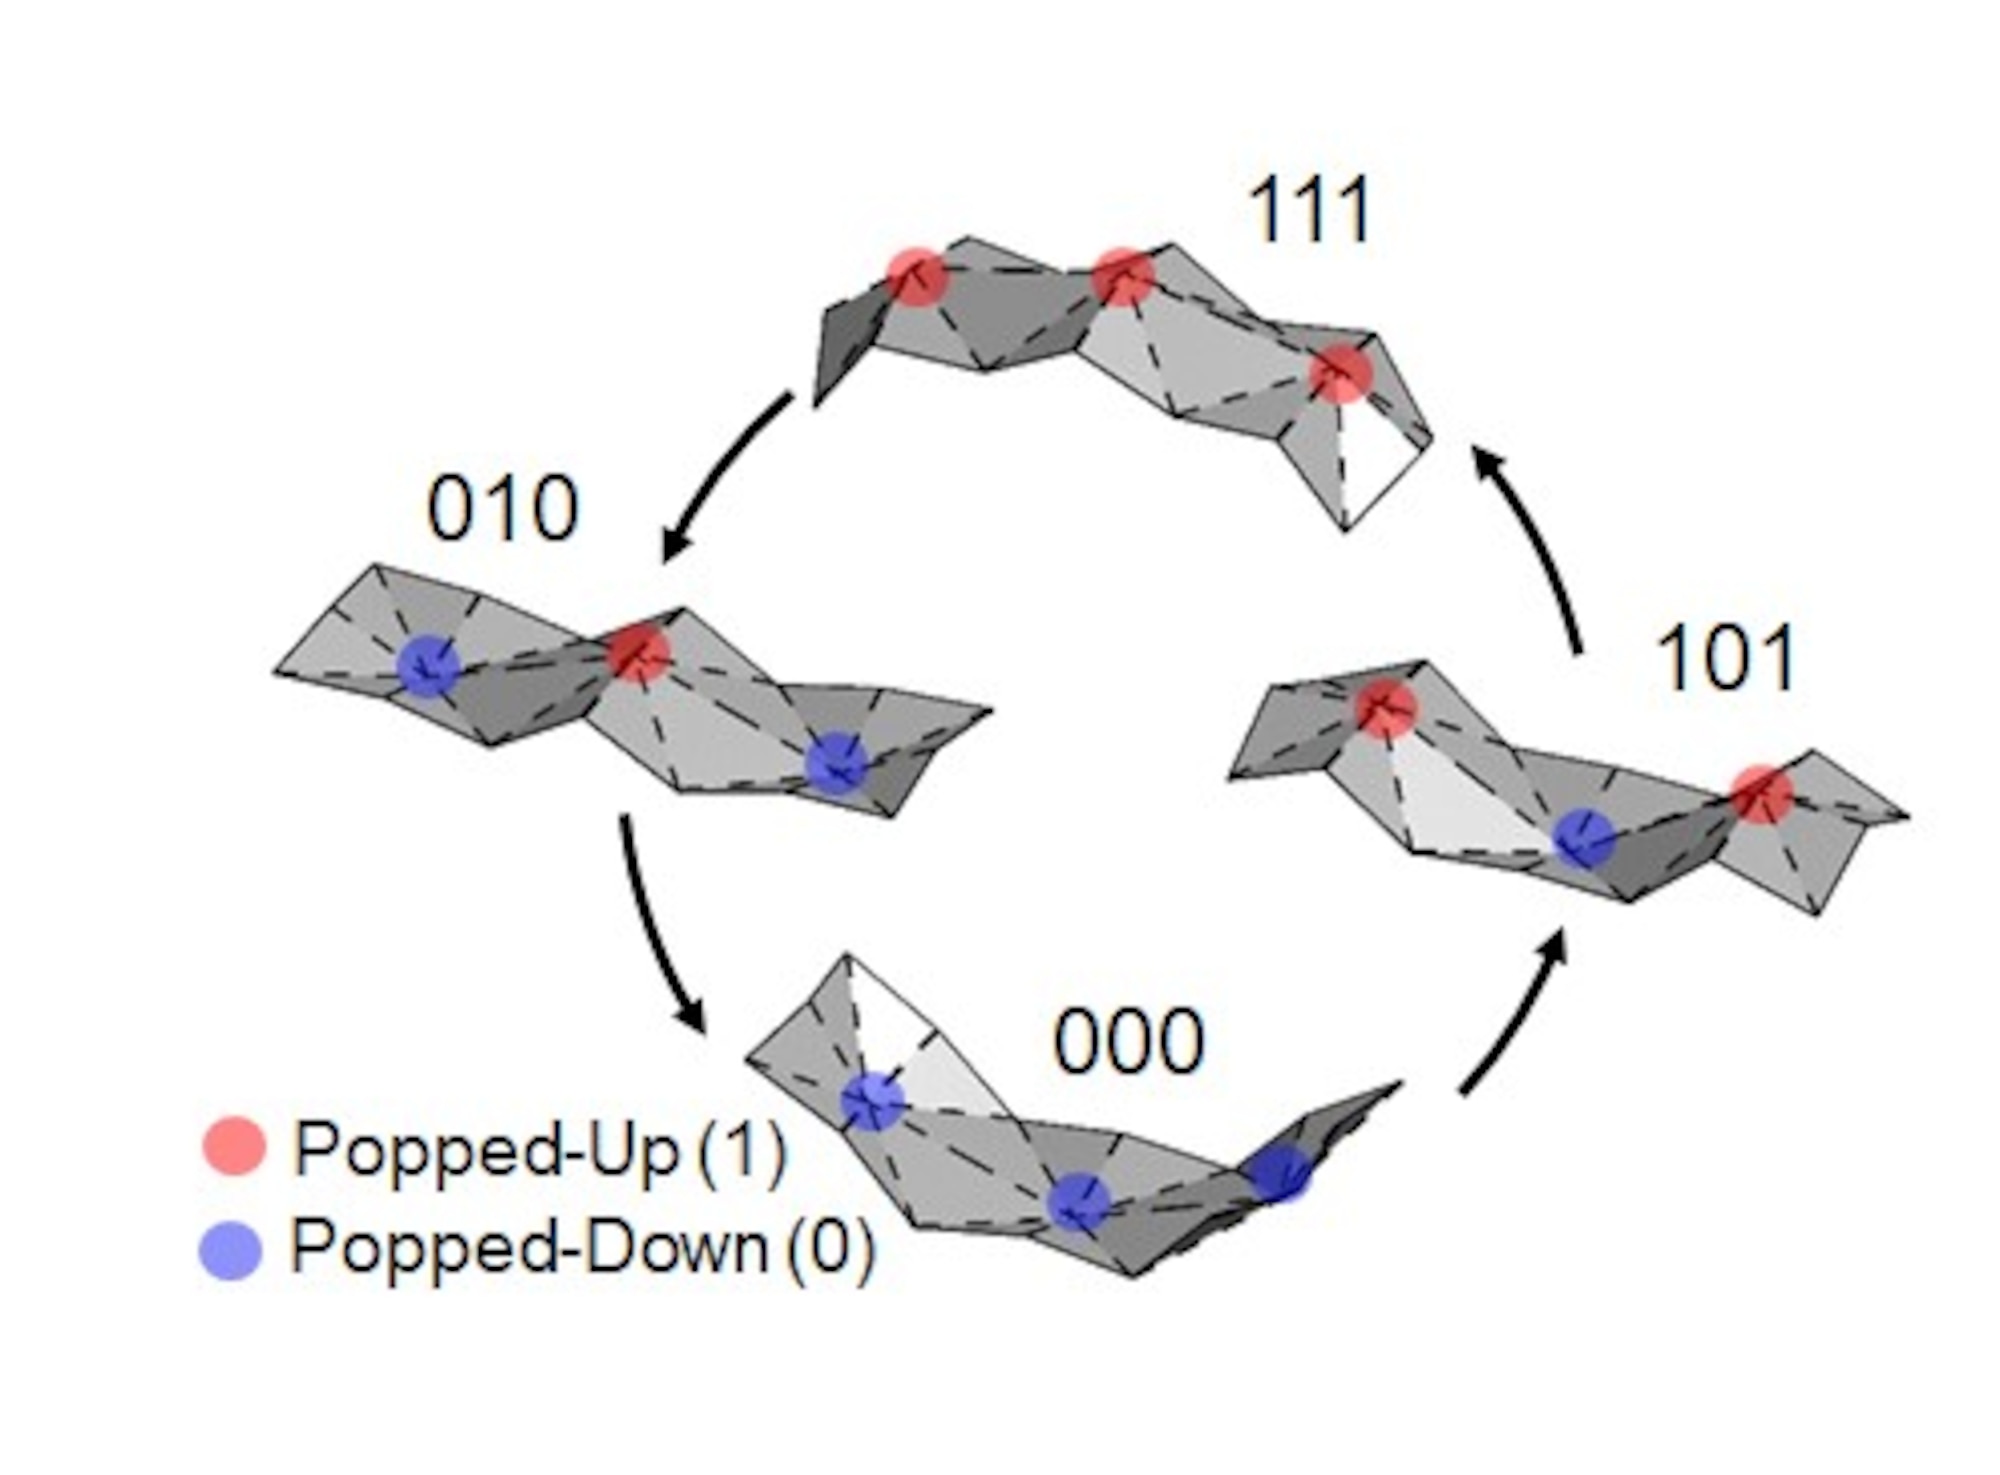 A multi-stable origami structure with digital information abstracted from the popped-up (1) and popped-down (0) bit states.